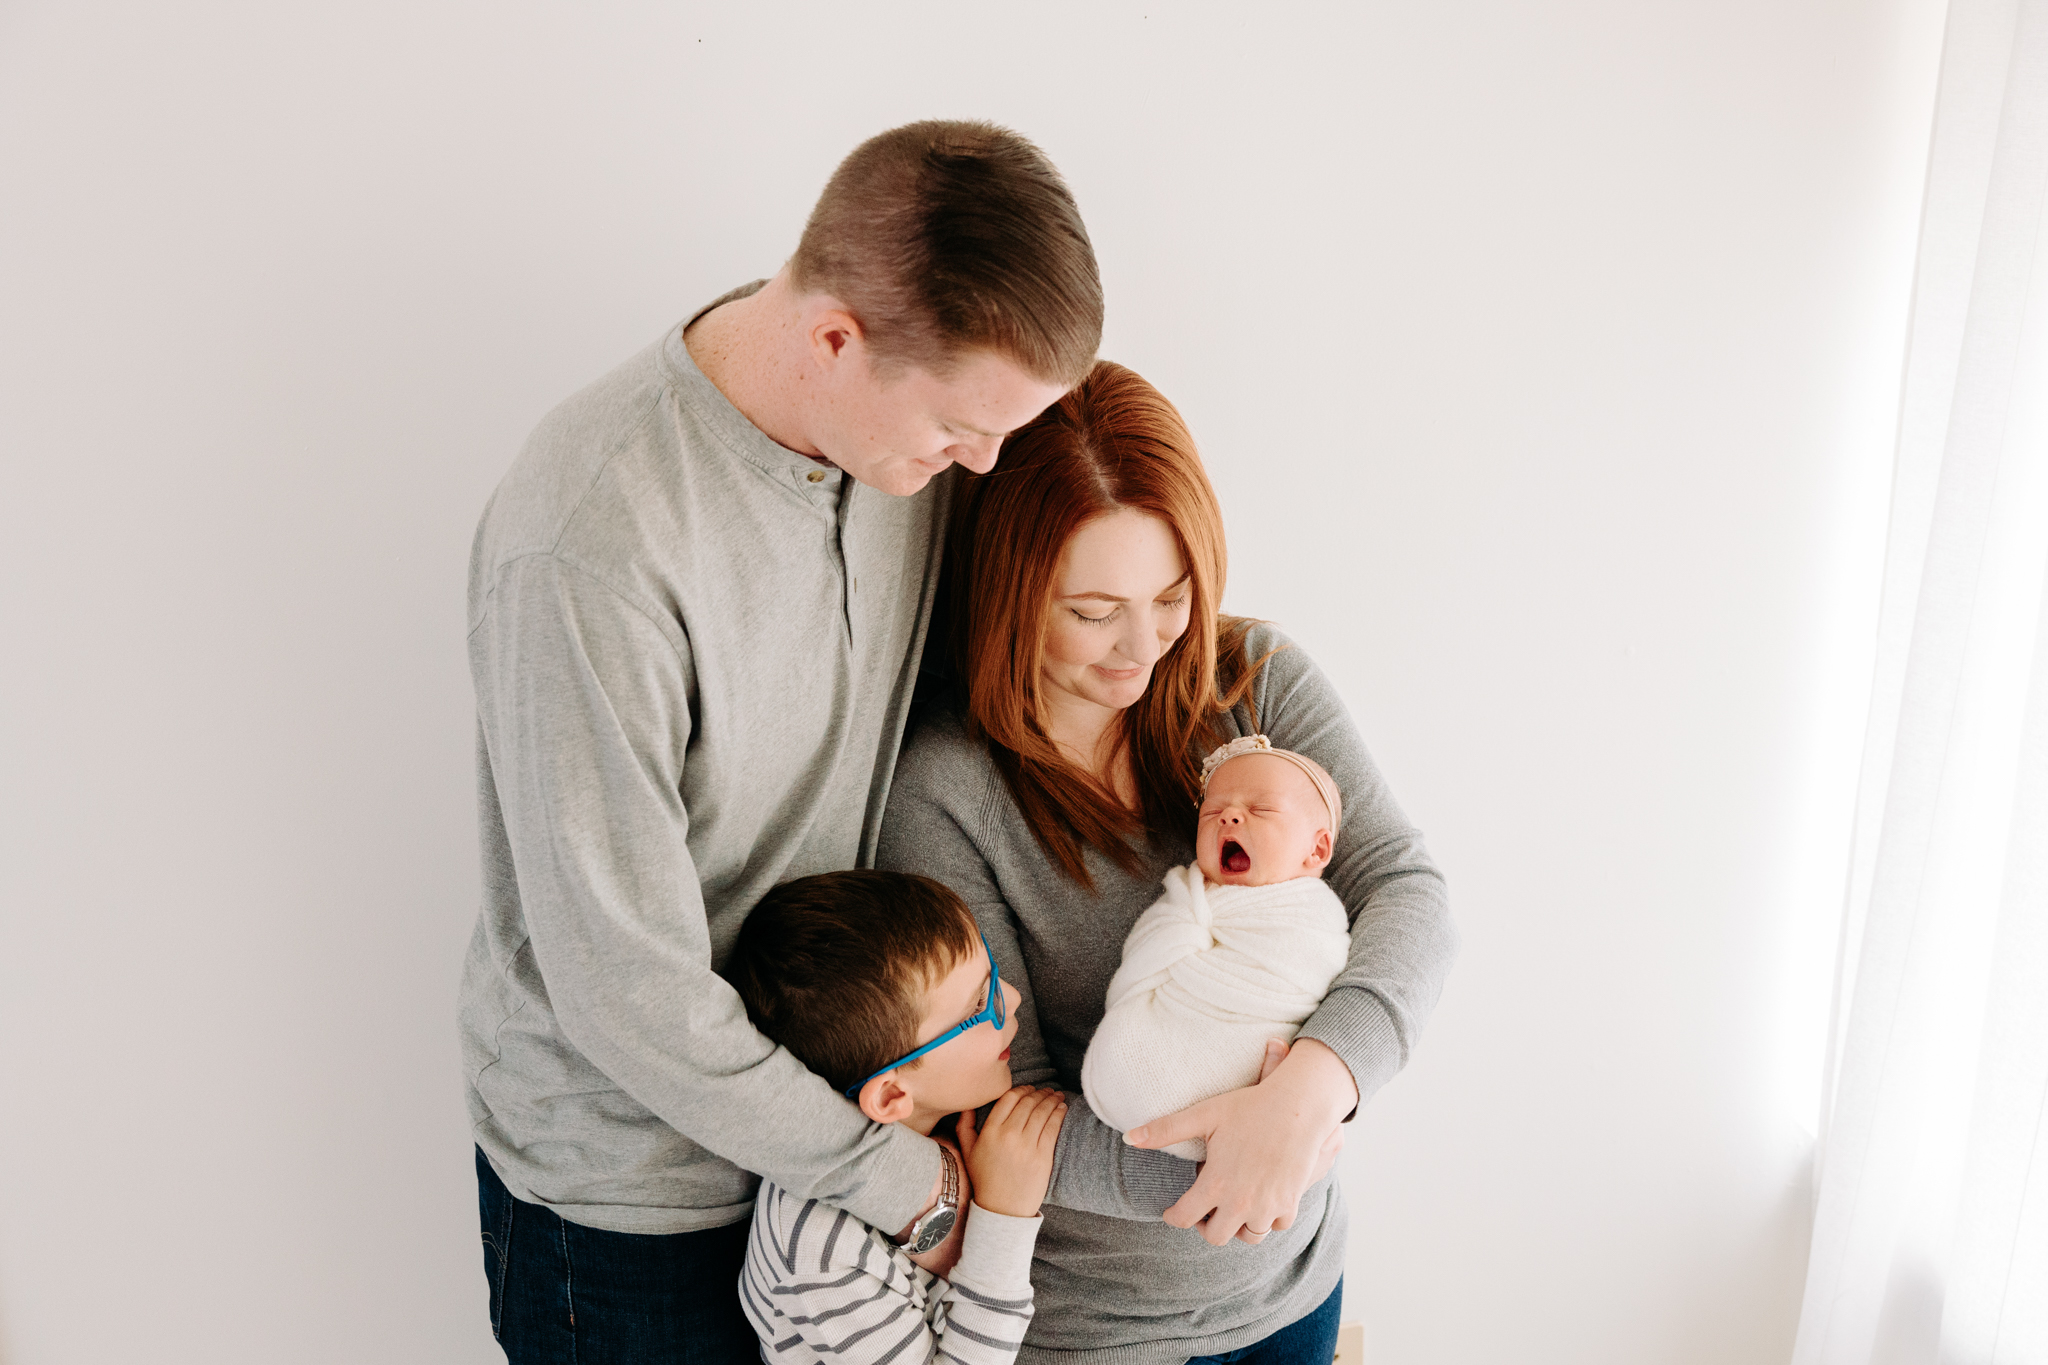 newborn and family photo session | Kelly Adrienne Photography